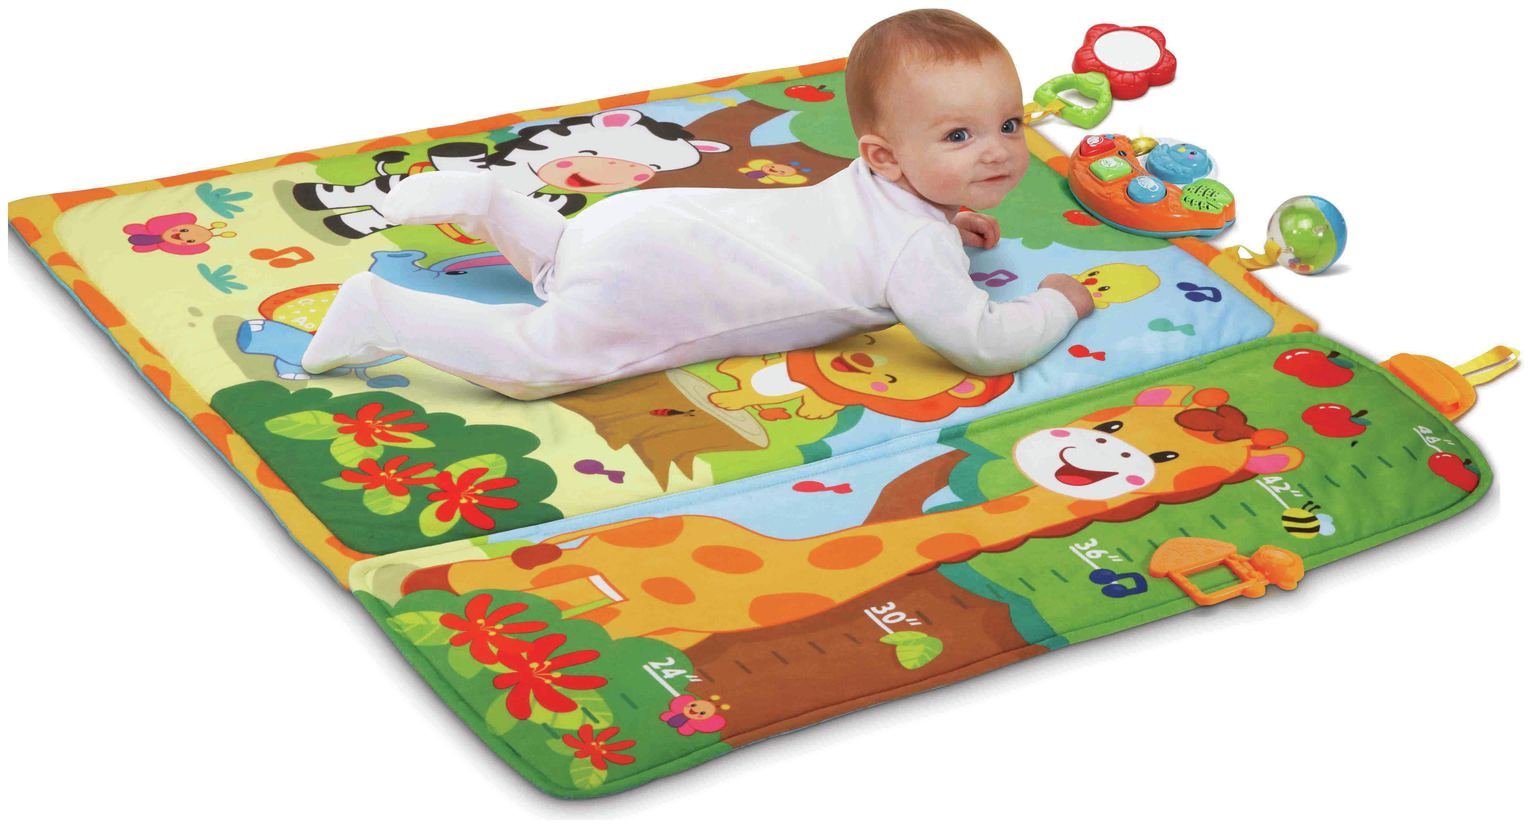 VTech 3-in-1 Grow with Me Playmat